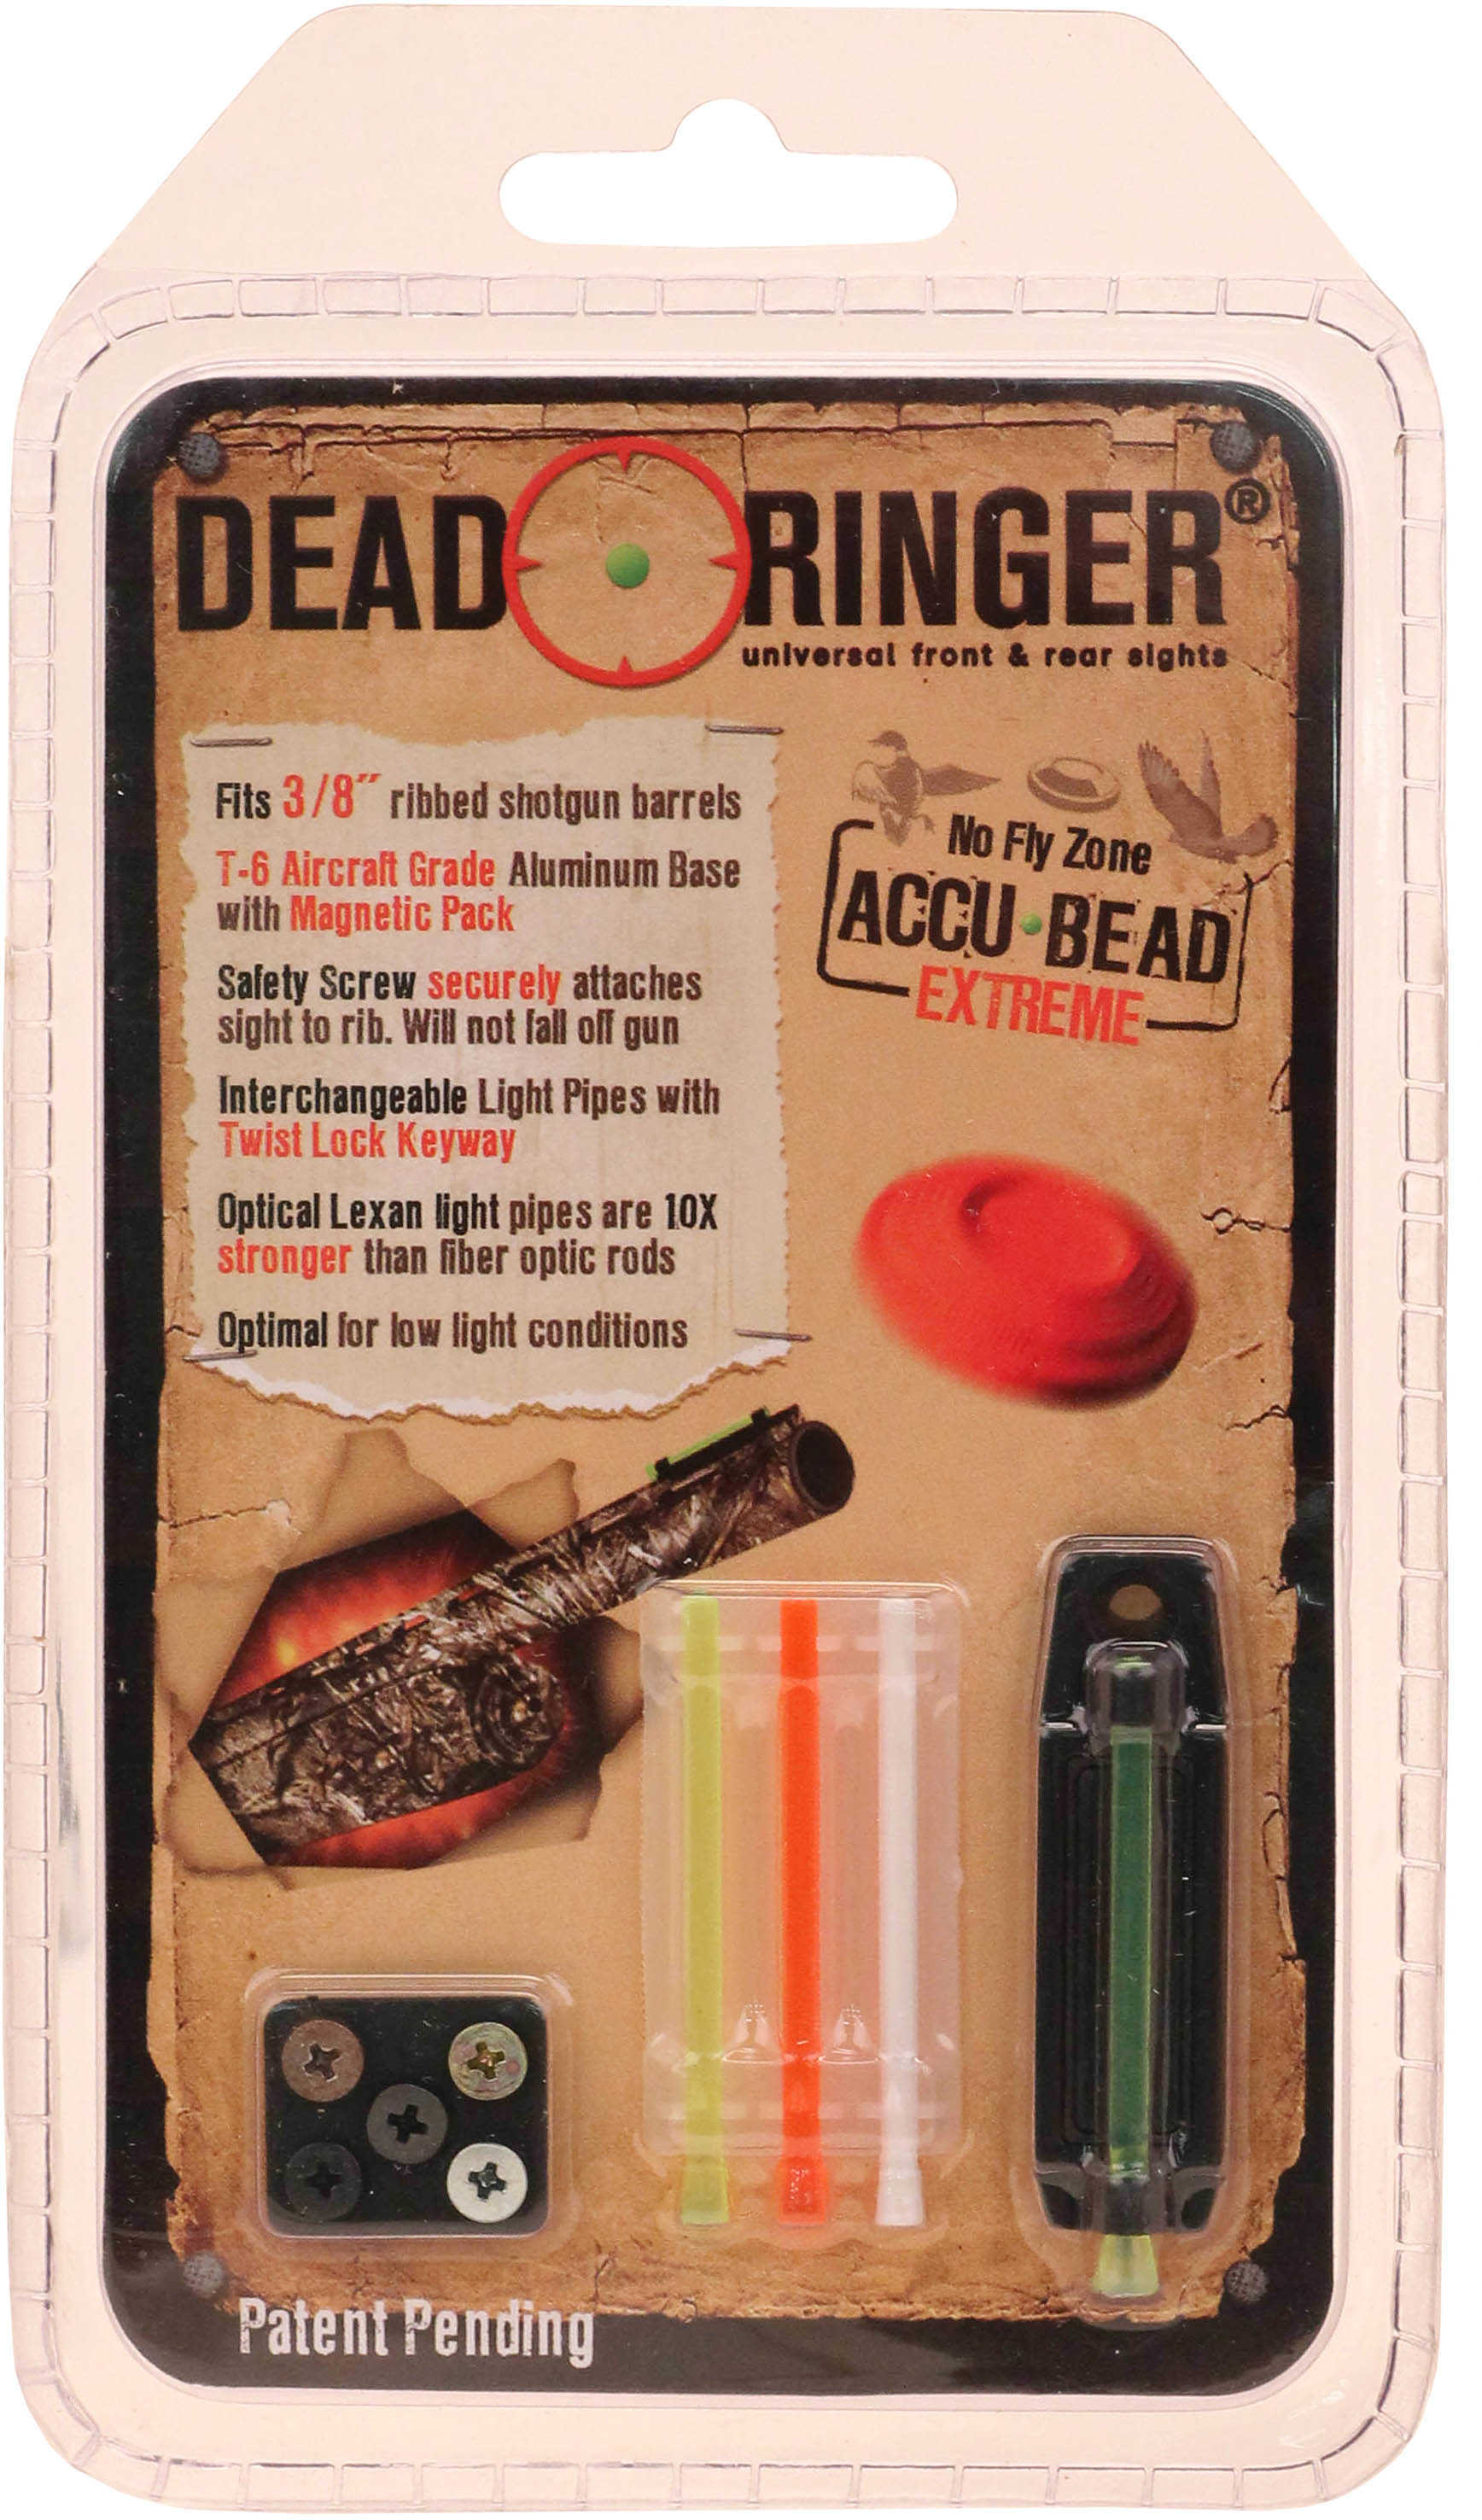 Dead Ringer Sights Accu-Bead Extreme 3/8 Md#: Dr4447